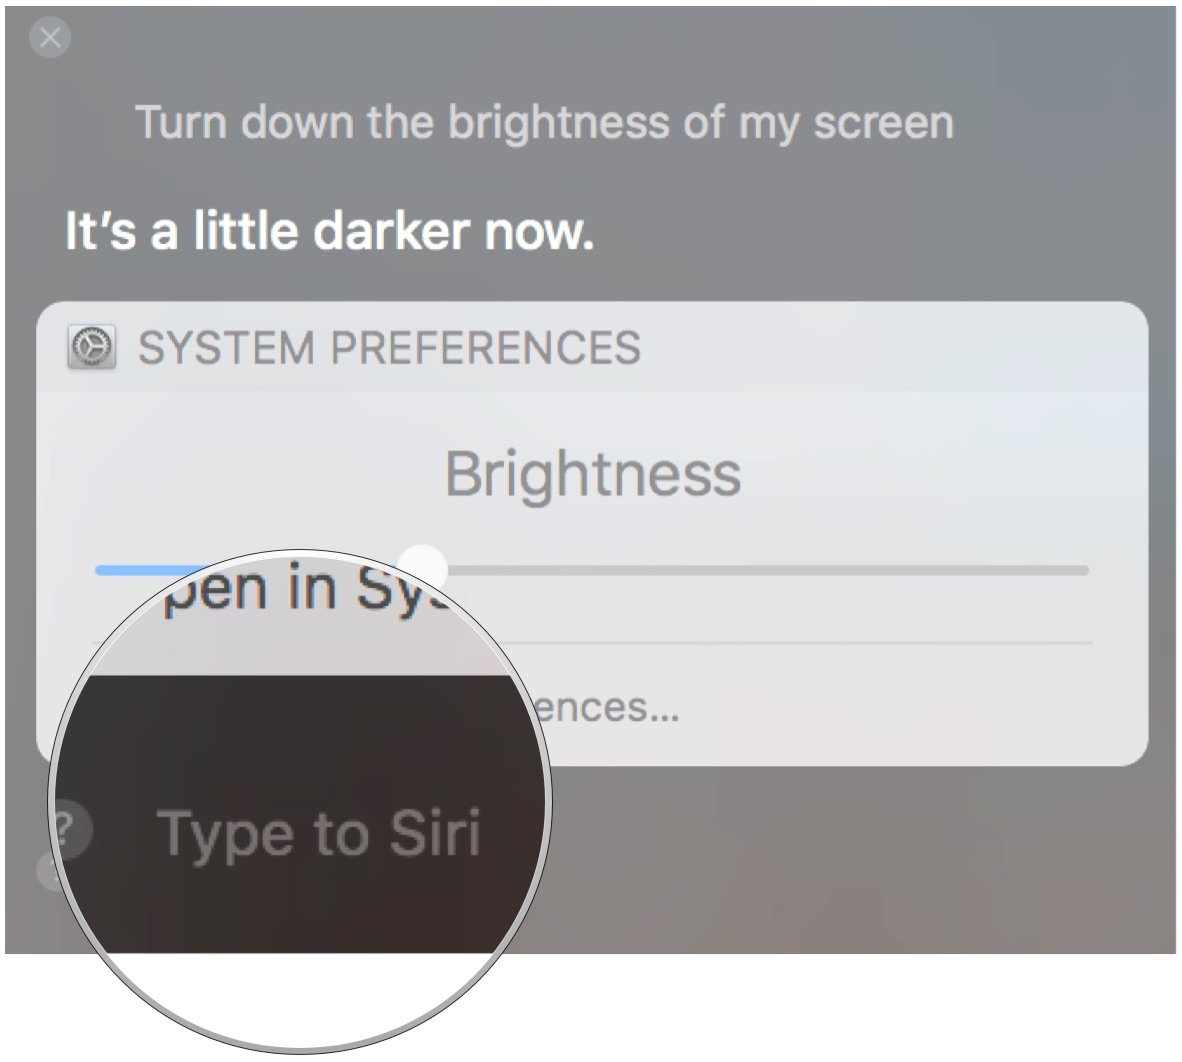 Click o Type to Siri and start typing